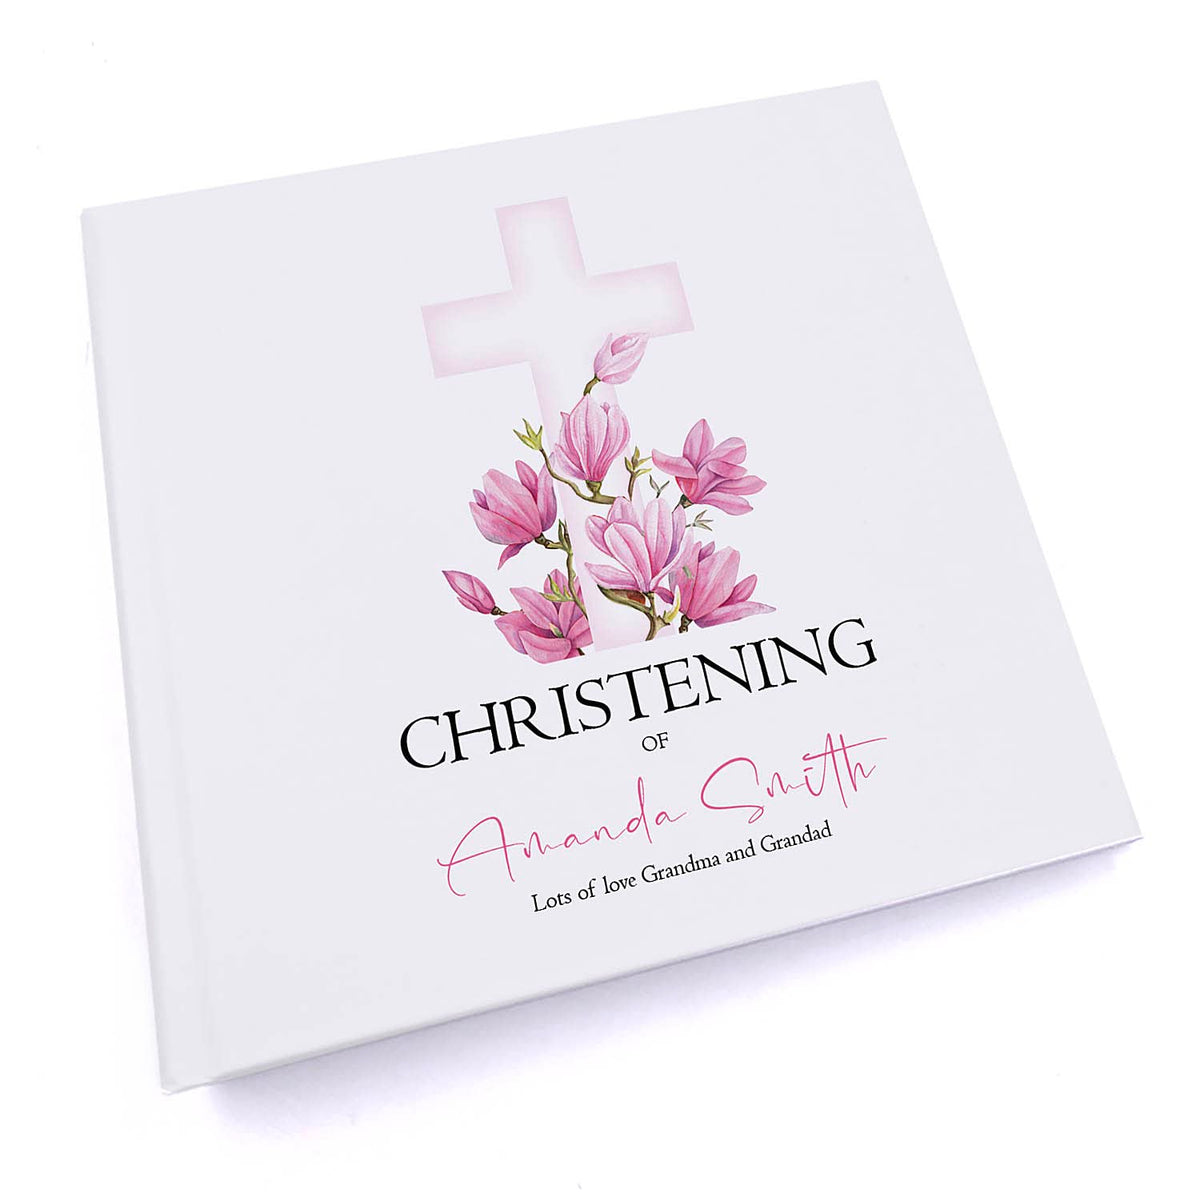 Personalised Christening 6x4" Slip in Photo Album Gift With Pink Cross